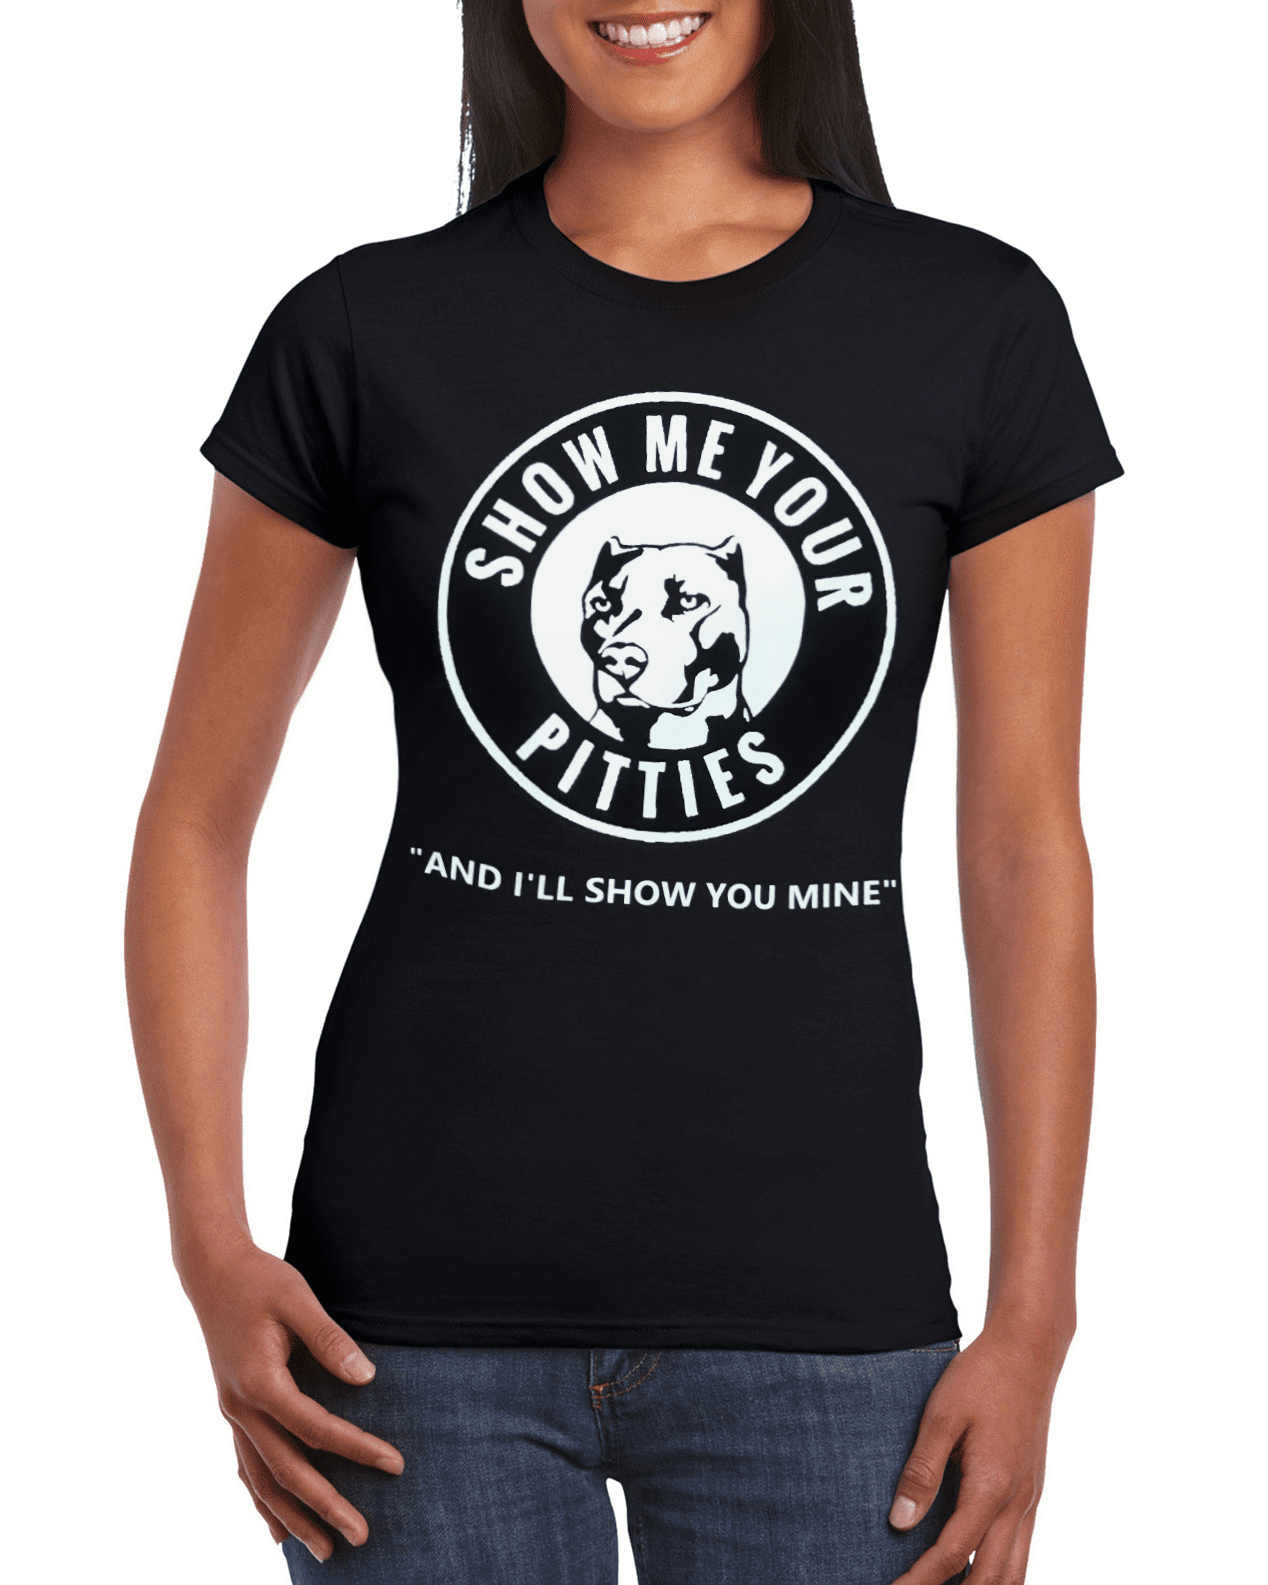 Show me Your Pitties - And ill show you mine -- T-SHIRT - WOMENS  CUT (White print)